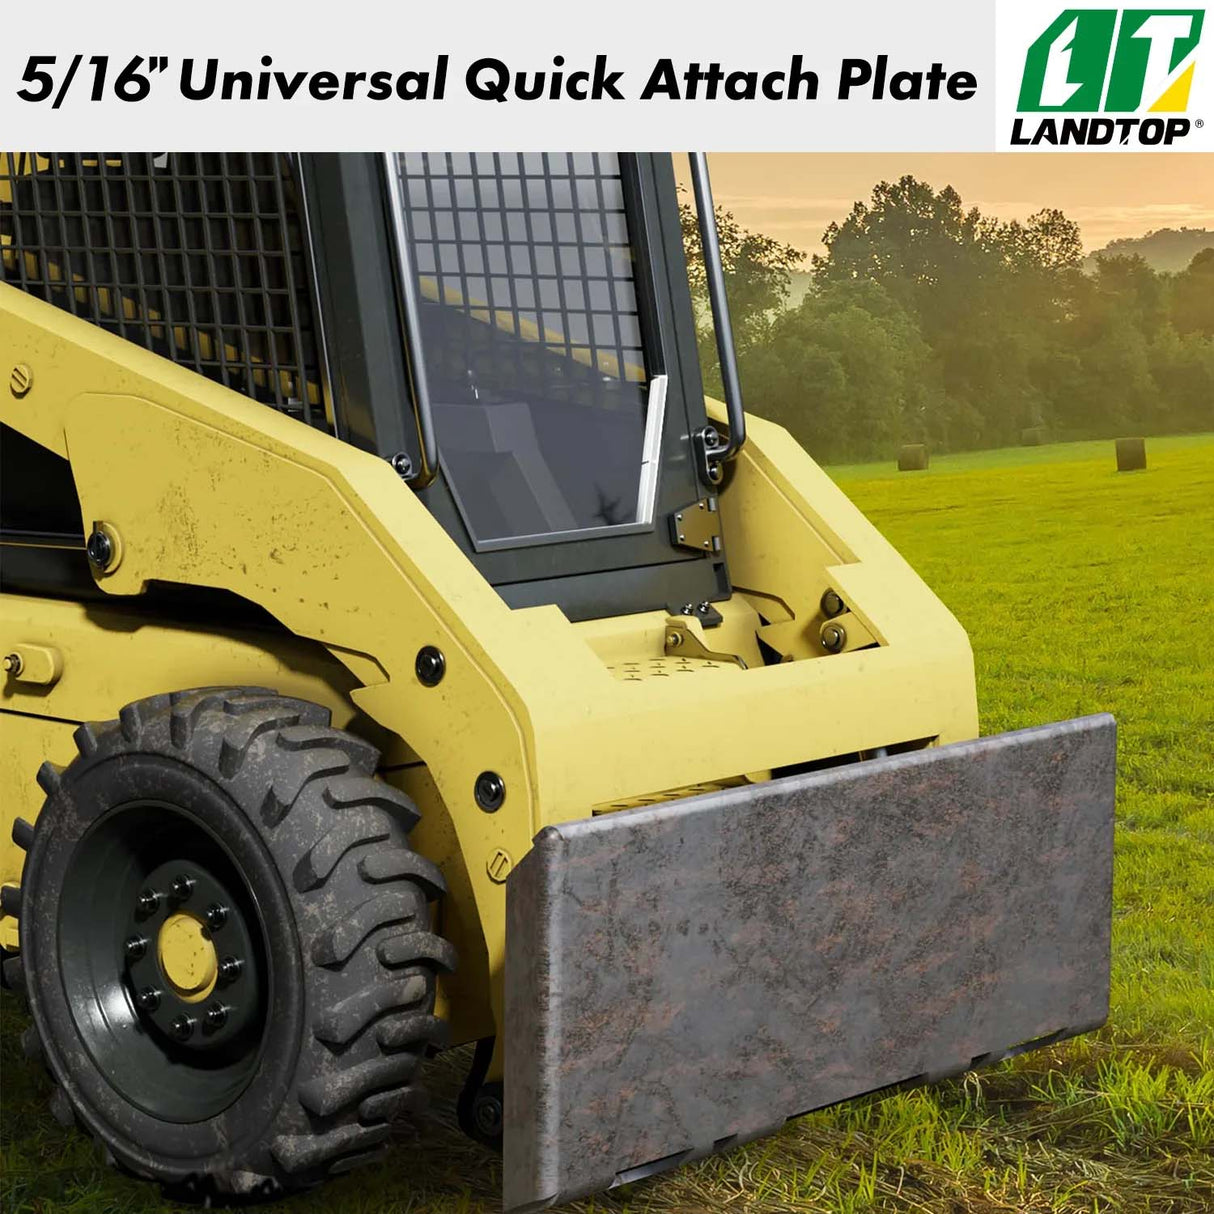 5/16" Universal Quick Attach Mount Plate with Bottom Connector Holes & Reinforced Top Bar, Compatible with Kubota and Bobcat Skid Steers and Tractors